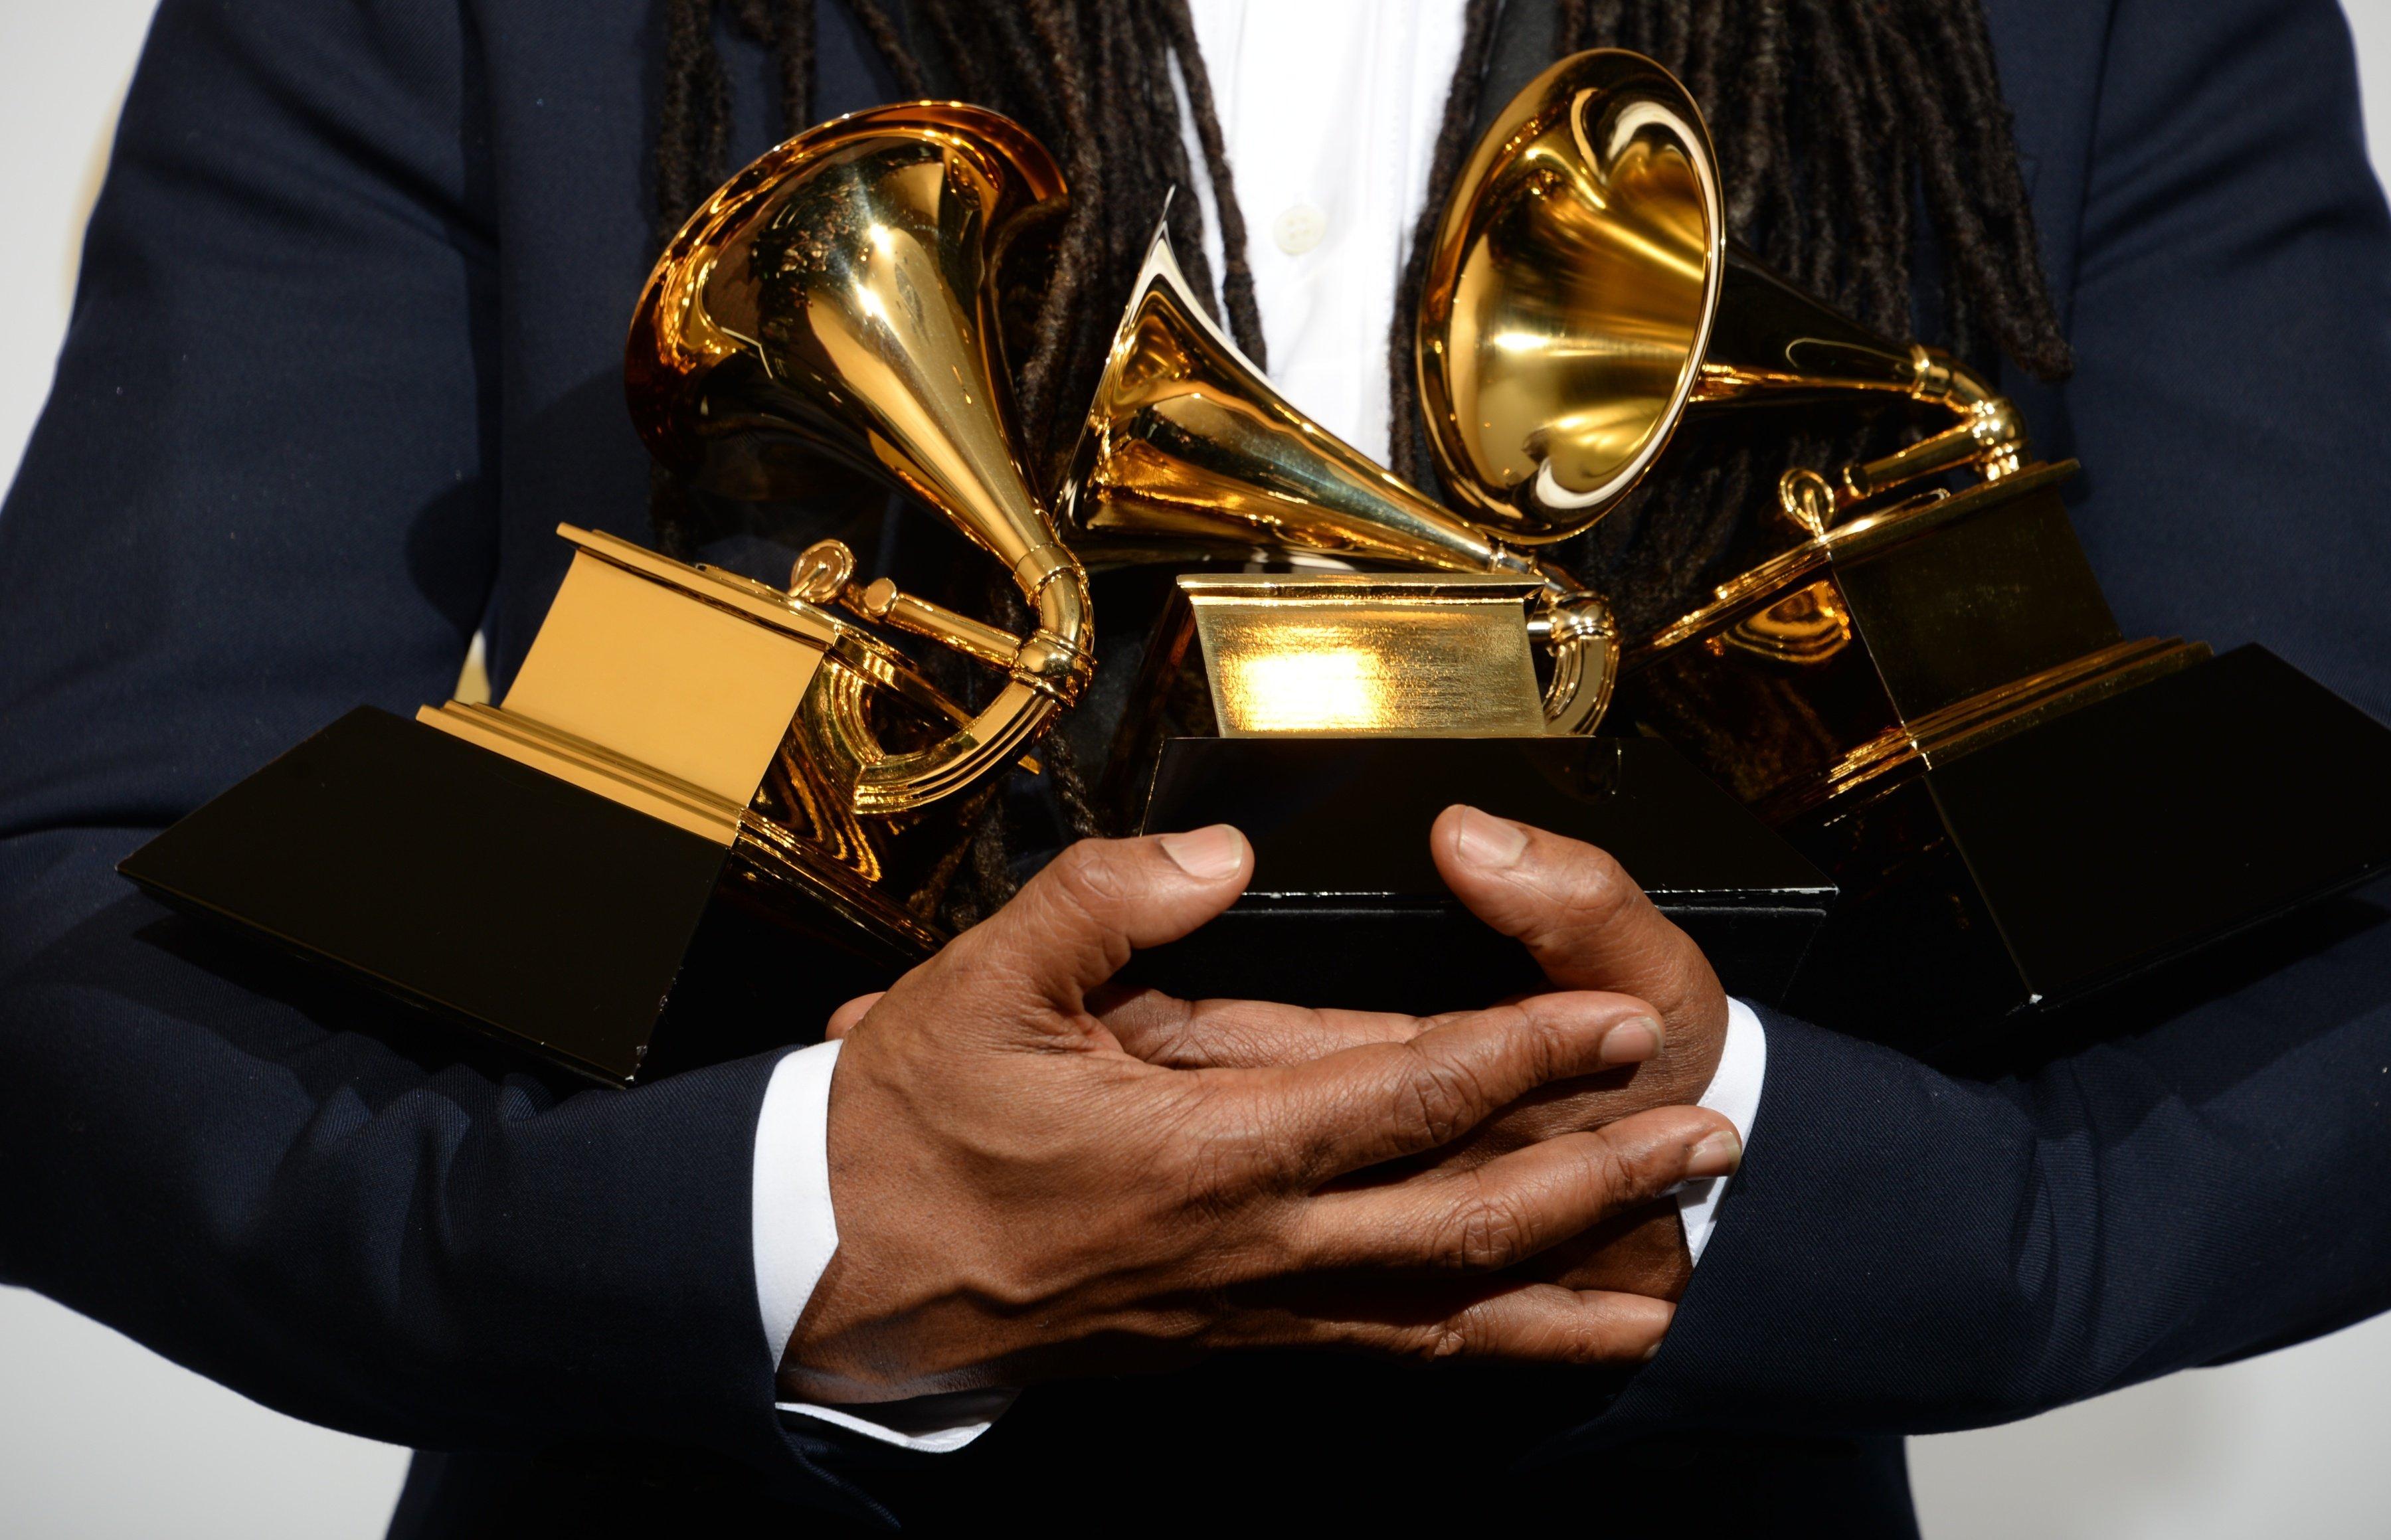 GRAMMY Awards in arms